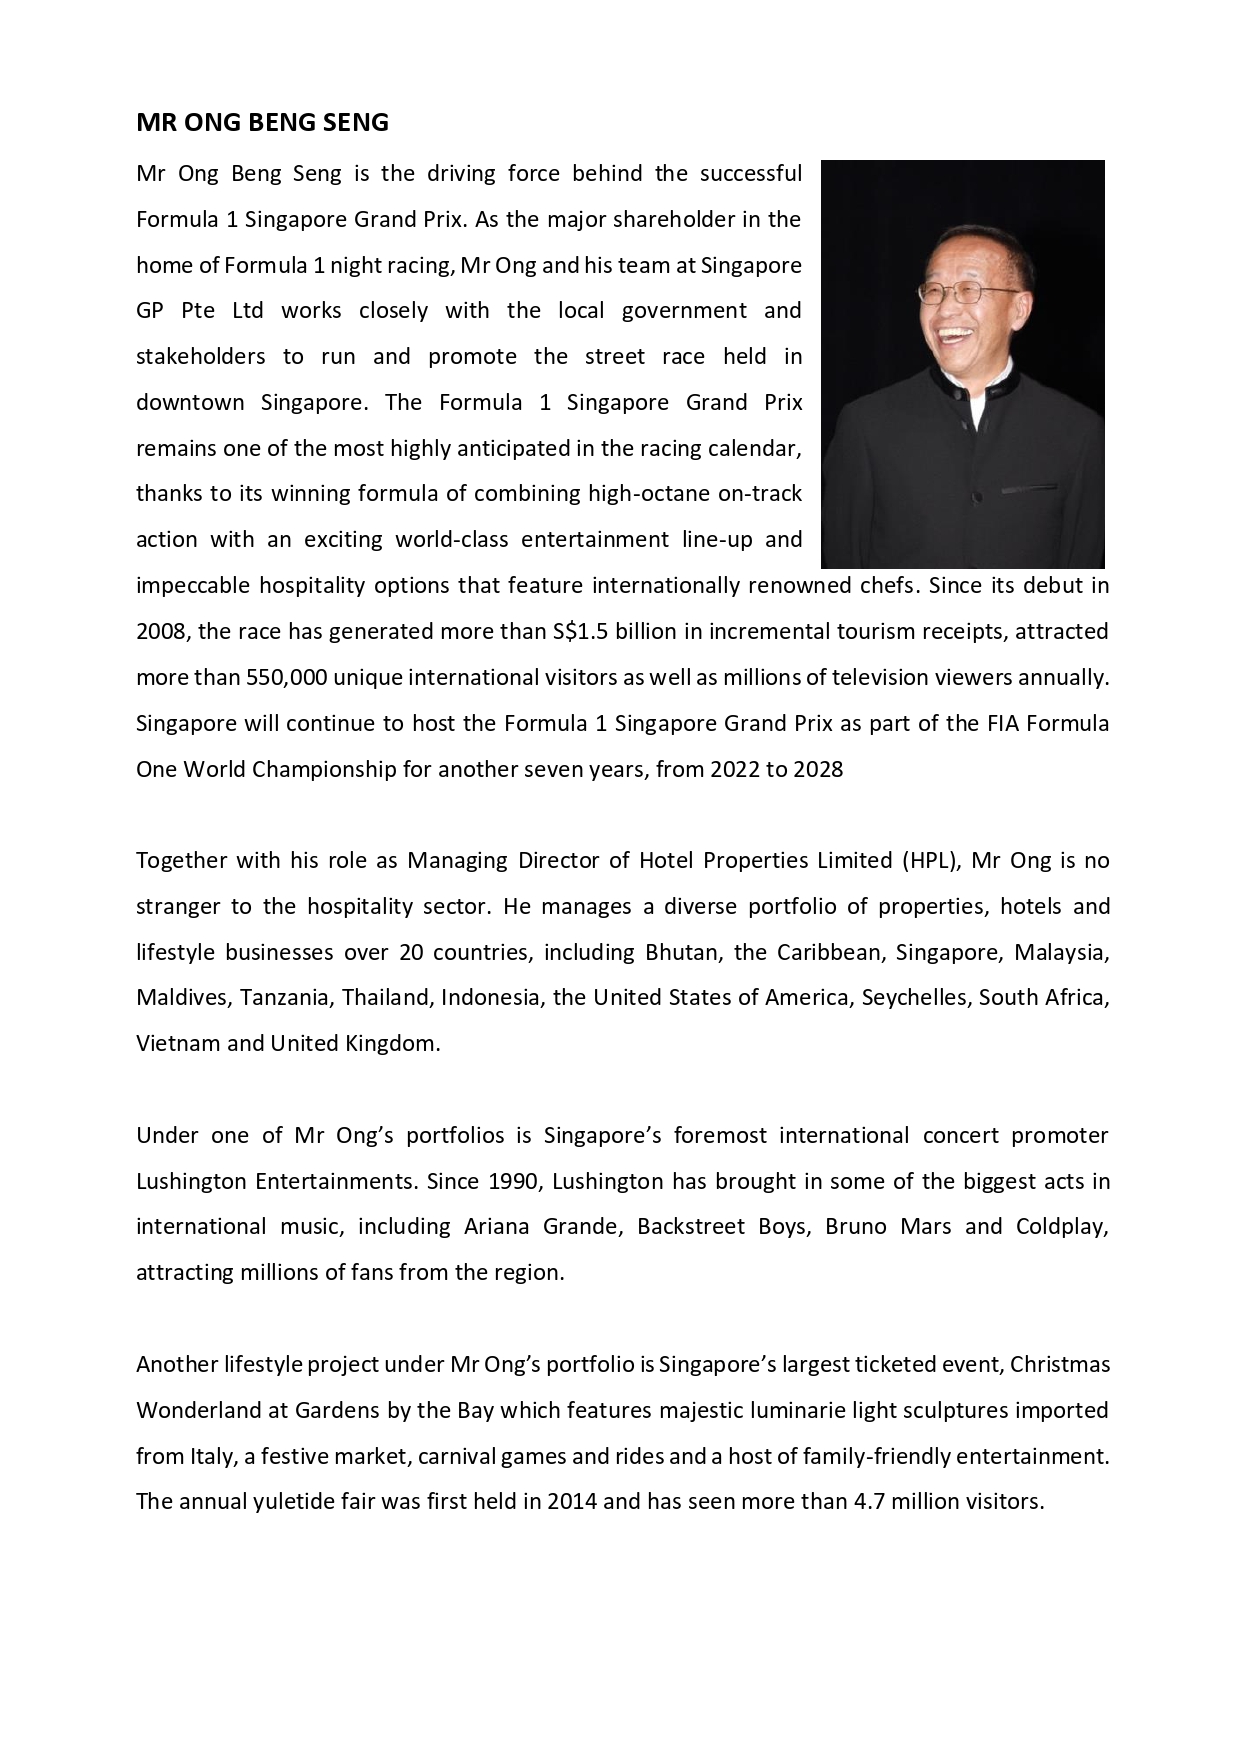 Media Release_Singappore Bids To Host WCH 2025 updated_pages-to-jpg-0007